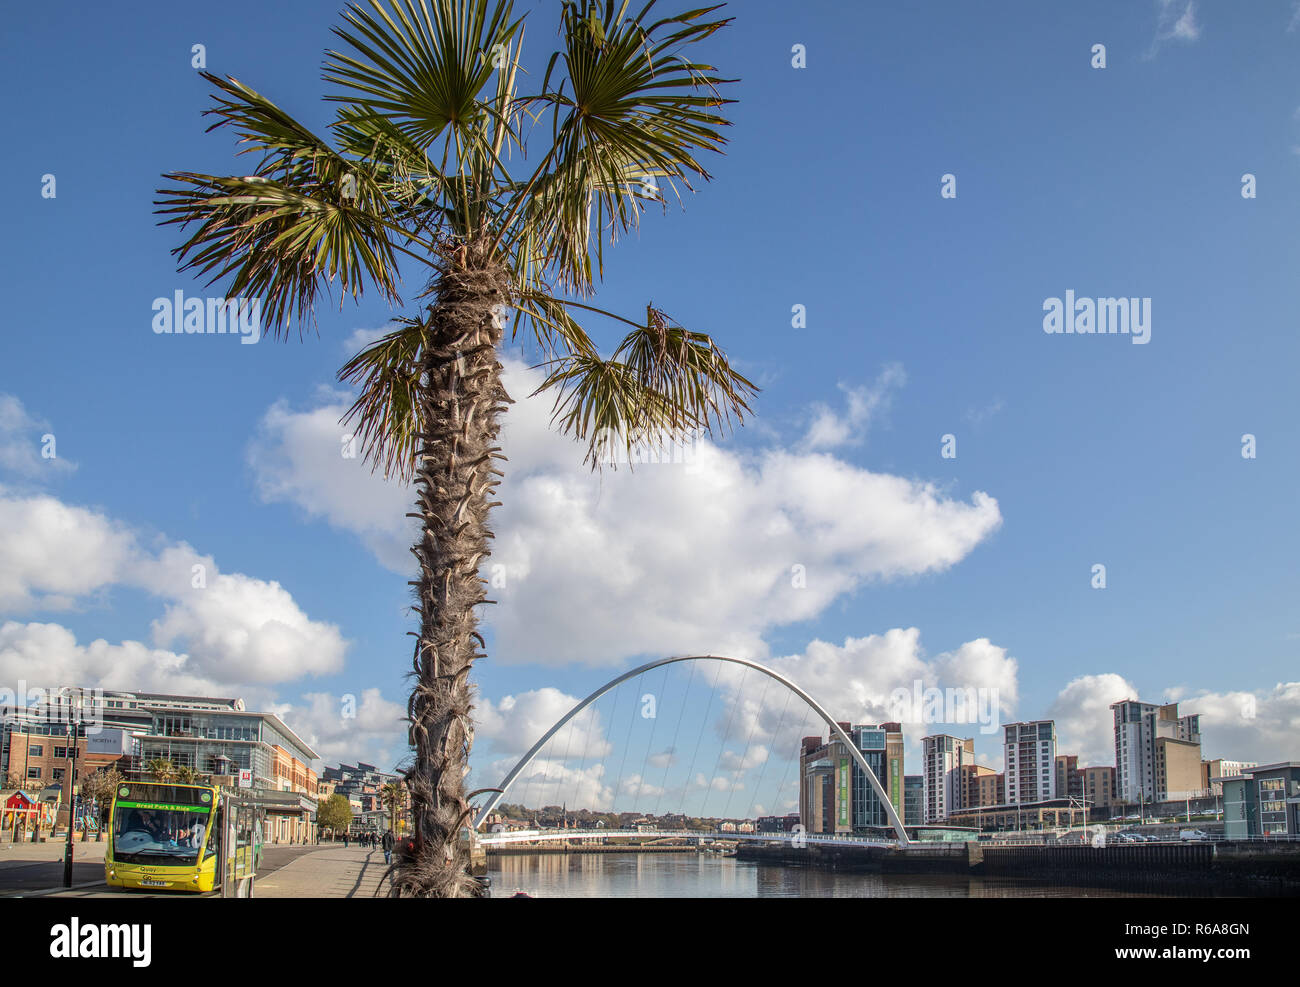 A view of the bridges spanning the Tyne in Newcastle in England Stock Photo